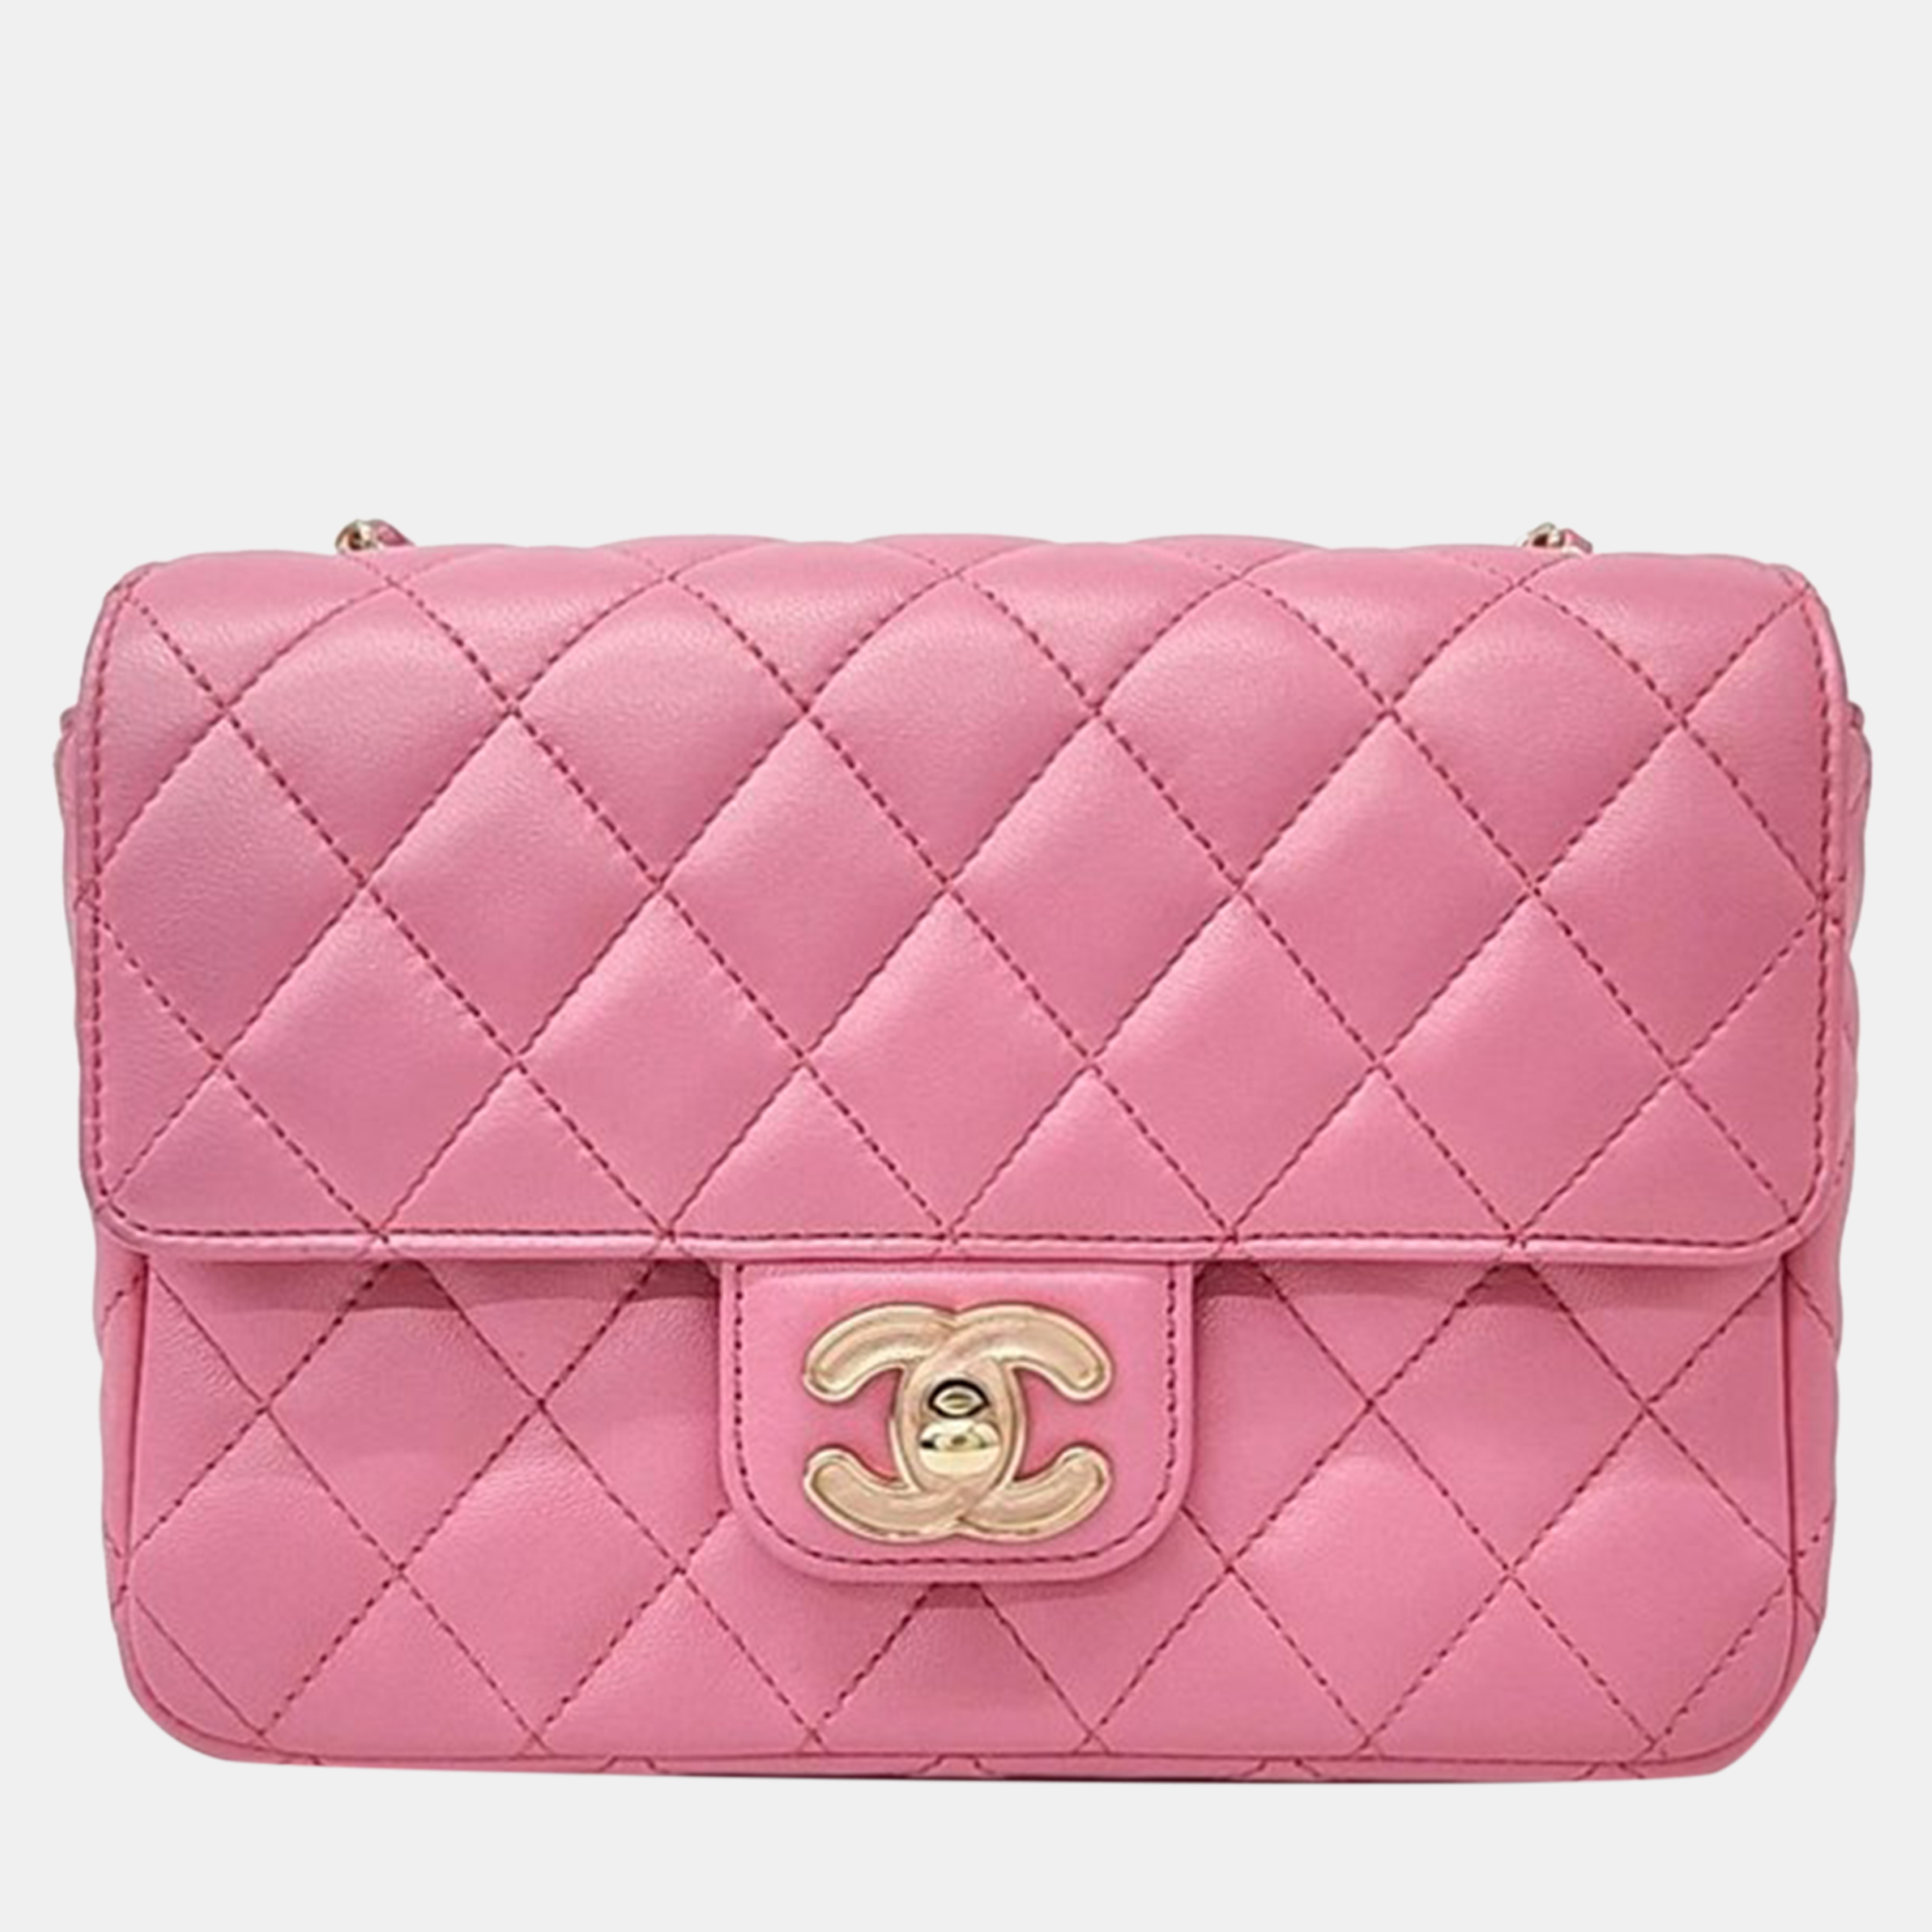 Chanel pearl pink leather mini classic flap bag